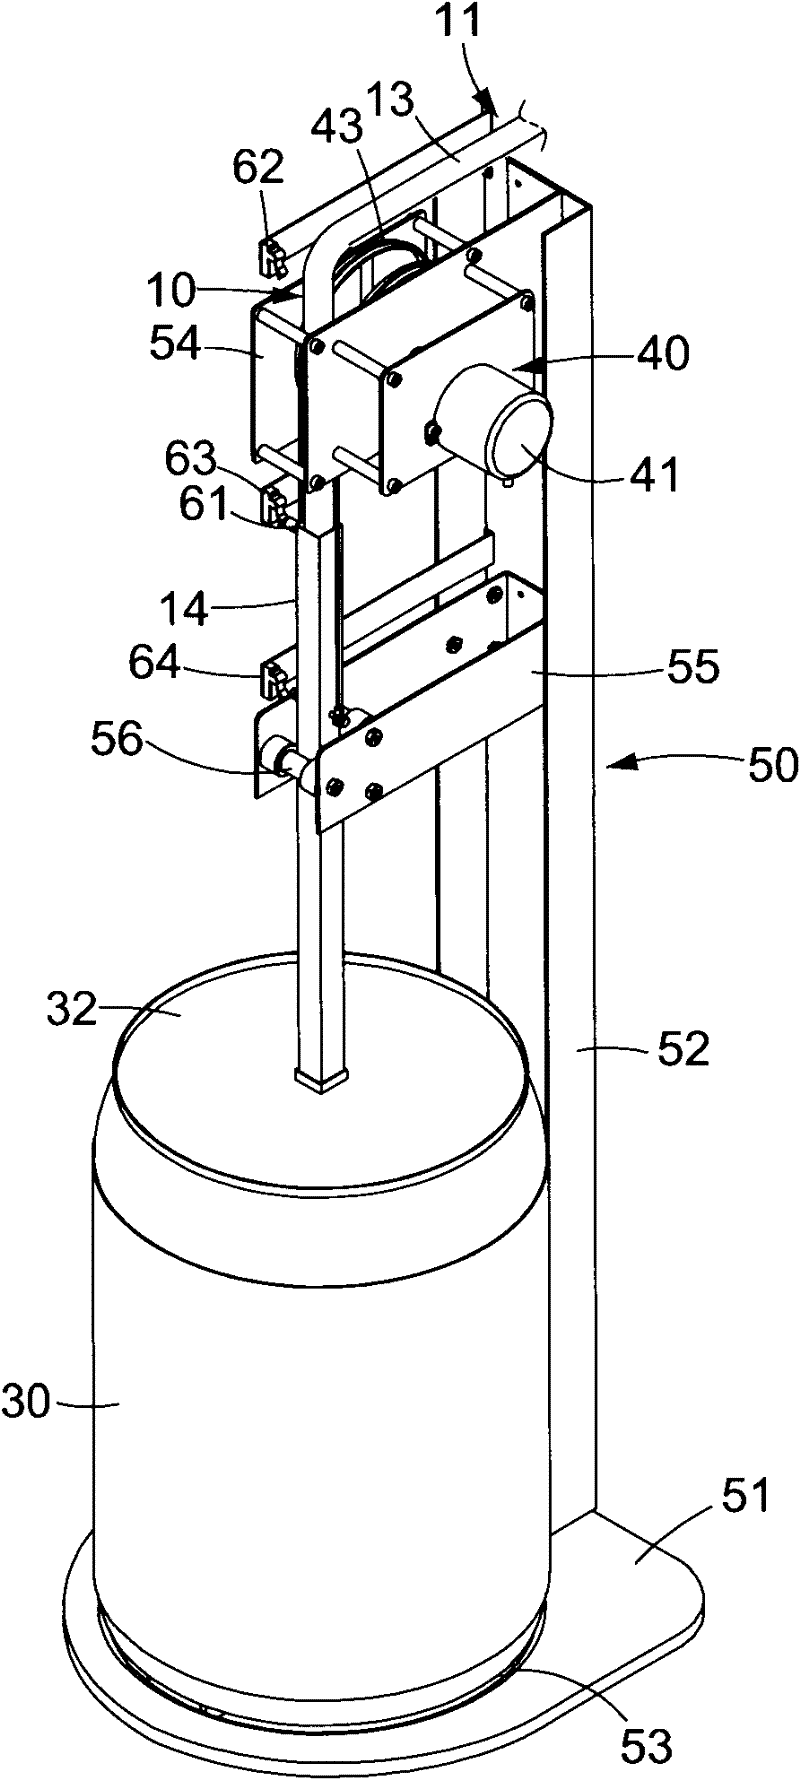 Beverage preparation device with automatic water filling function